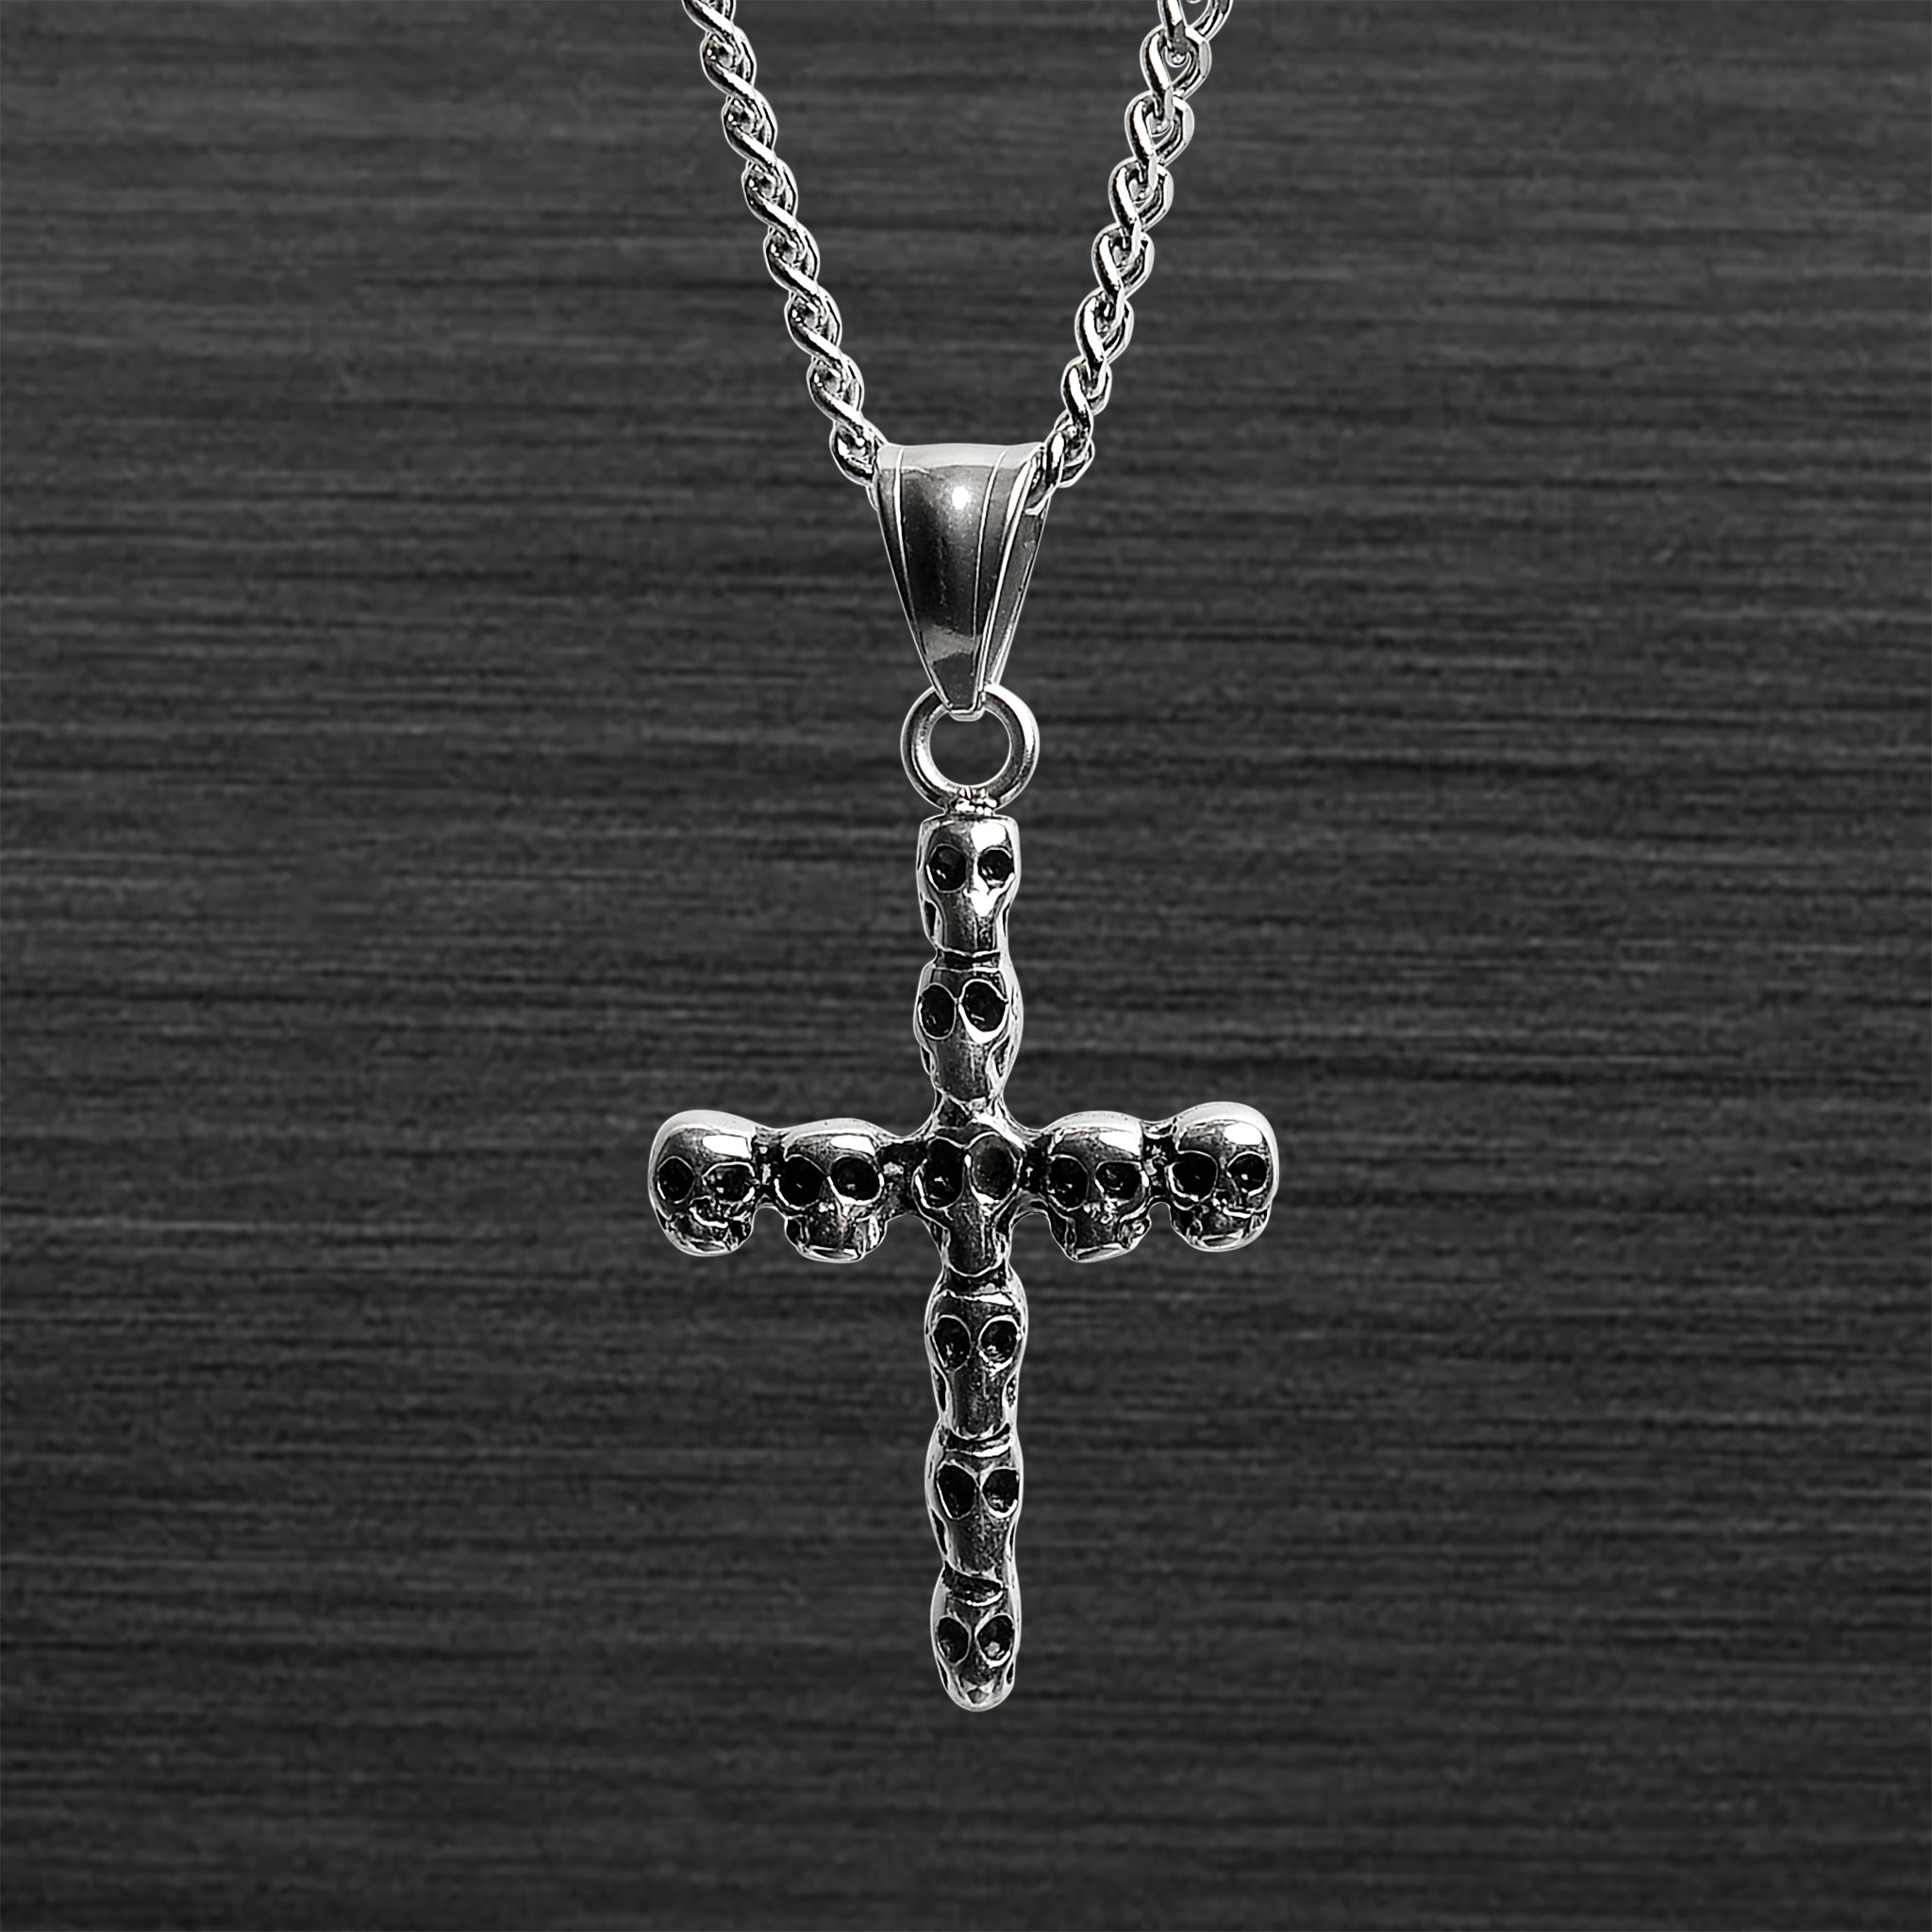 Stainless Steel Cross Of SKULLs Curb Chain Necklace / PDC2017-RTL